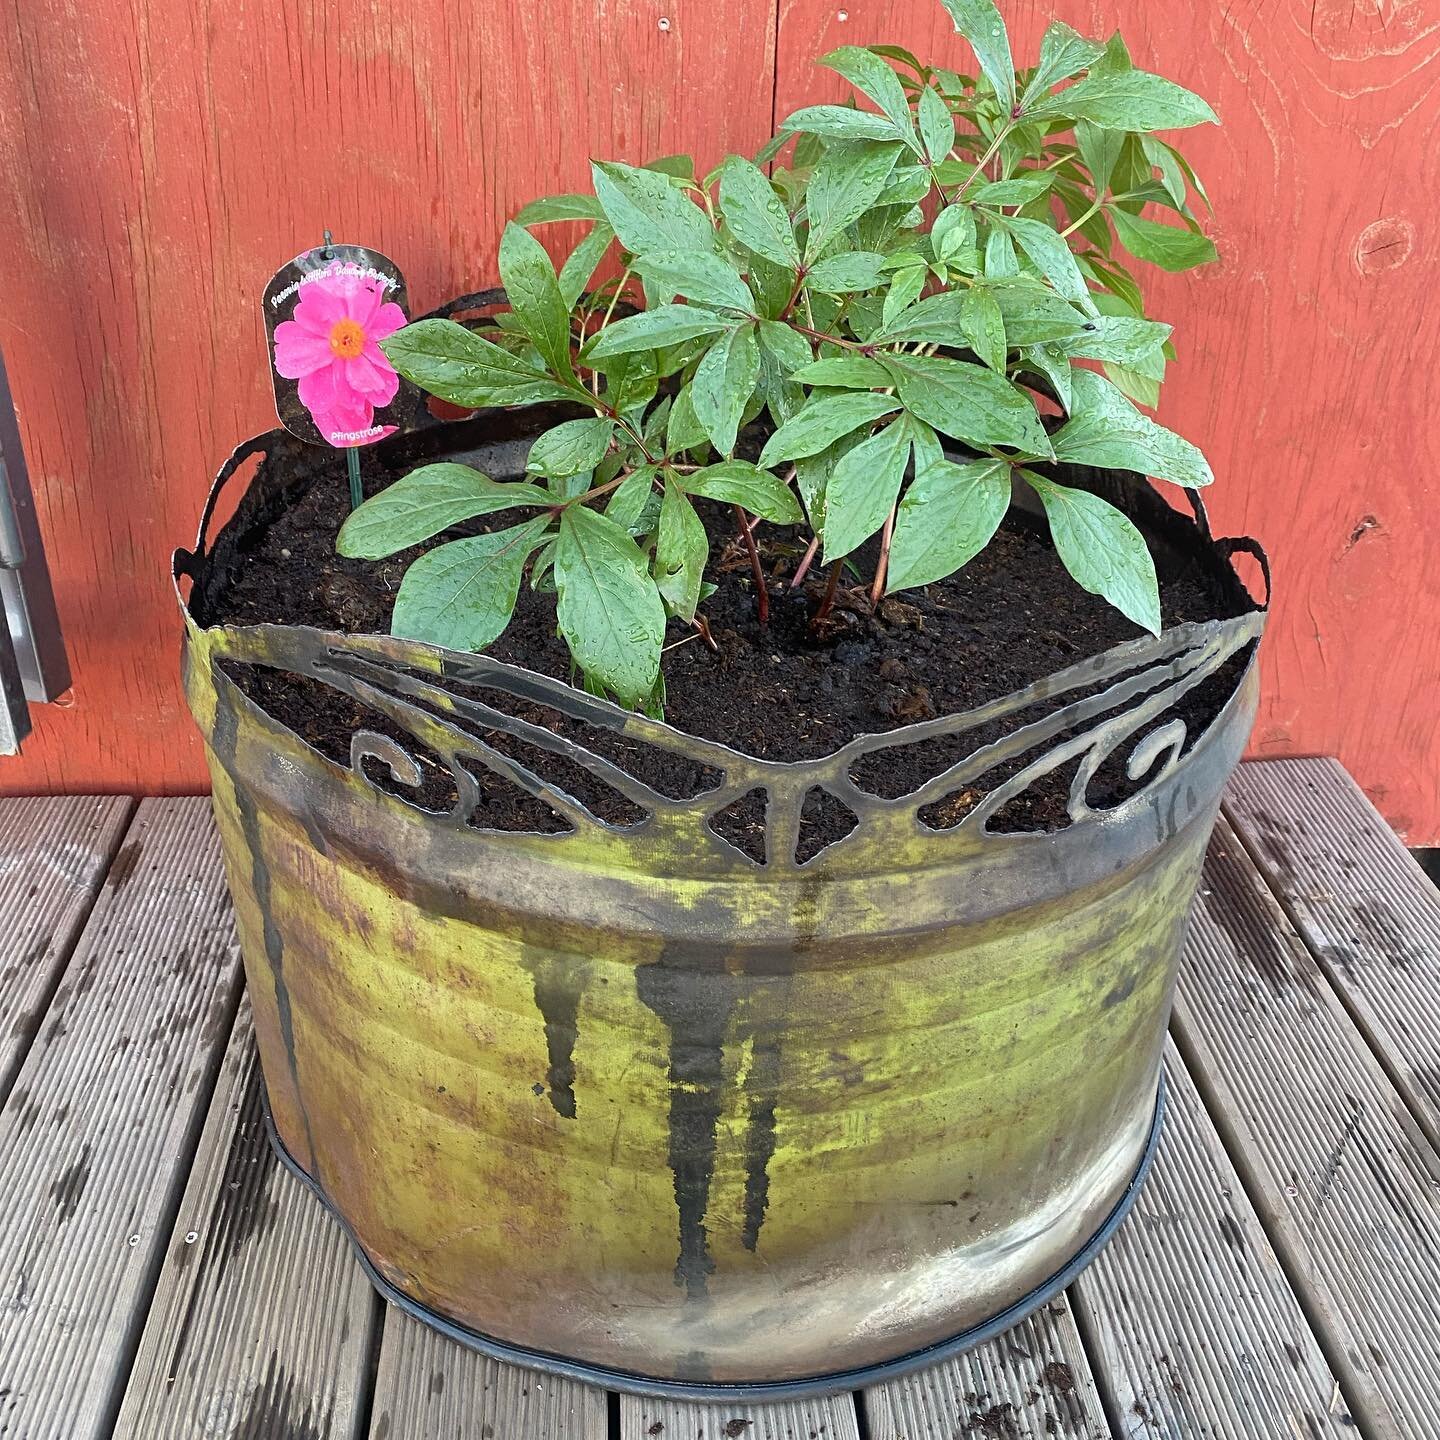 Todays one day build: repurposing an oil barrel for Peony planters. Designed by @annielocke @concrete_formingwork and fabricated by @kimetalsolutions💥 
.
.
.
#plasmacutting #plasmacut #oilbarrel #repurposed #urbanfarming #peonies